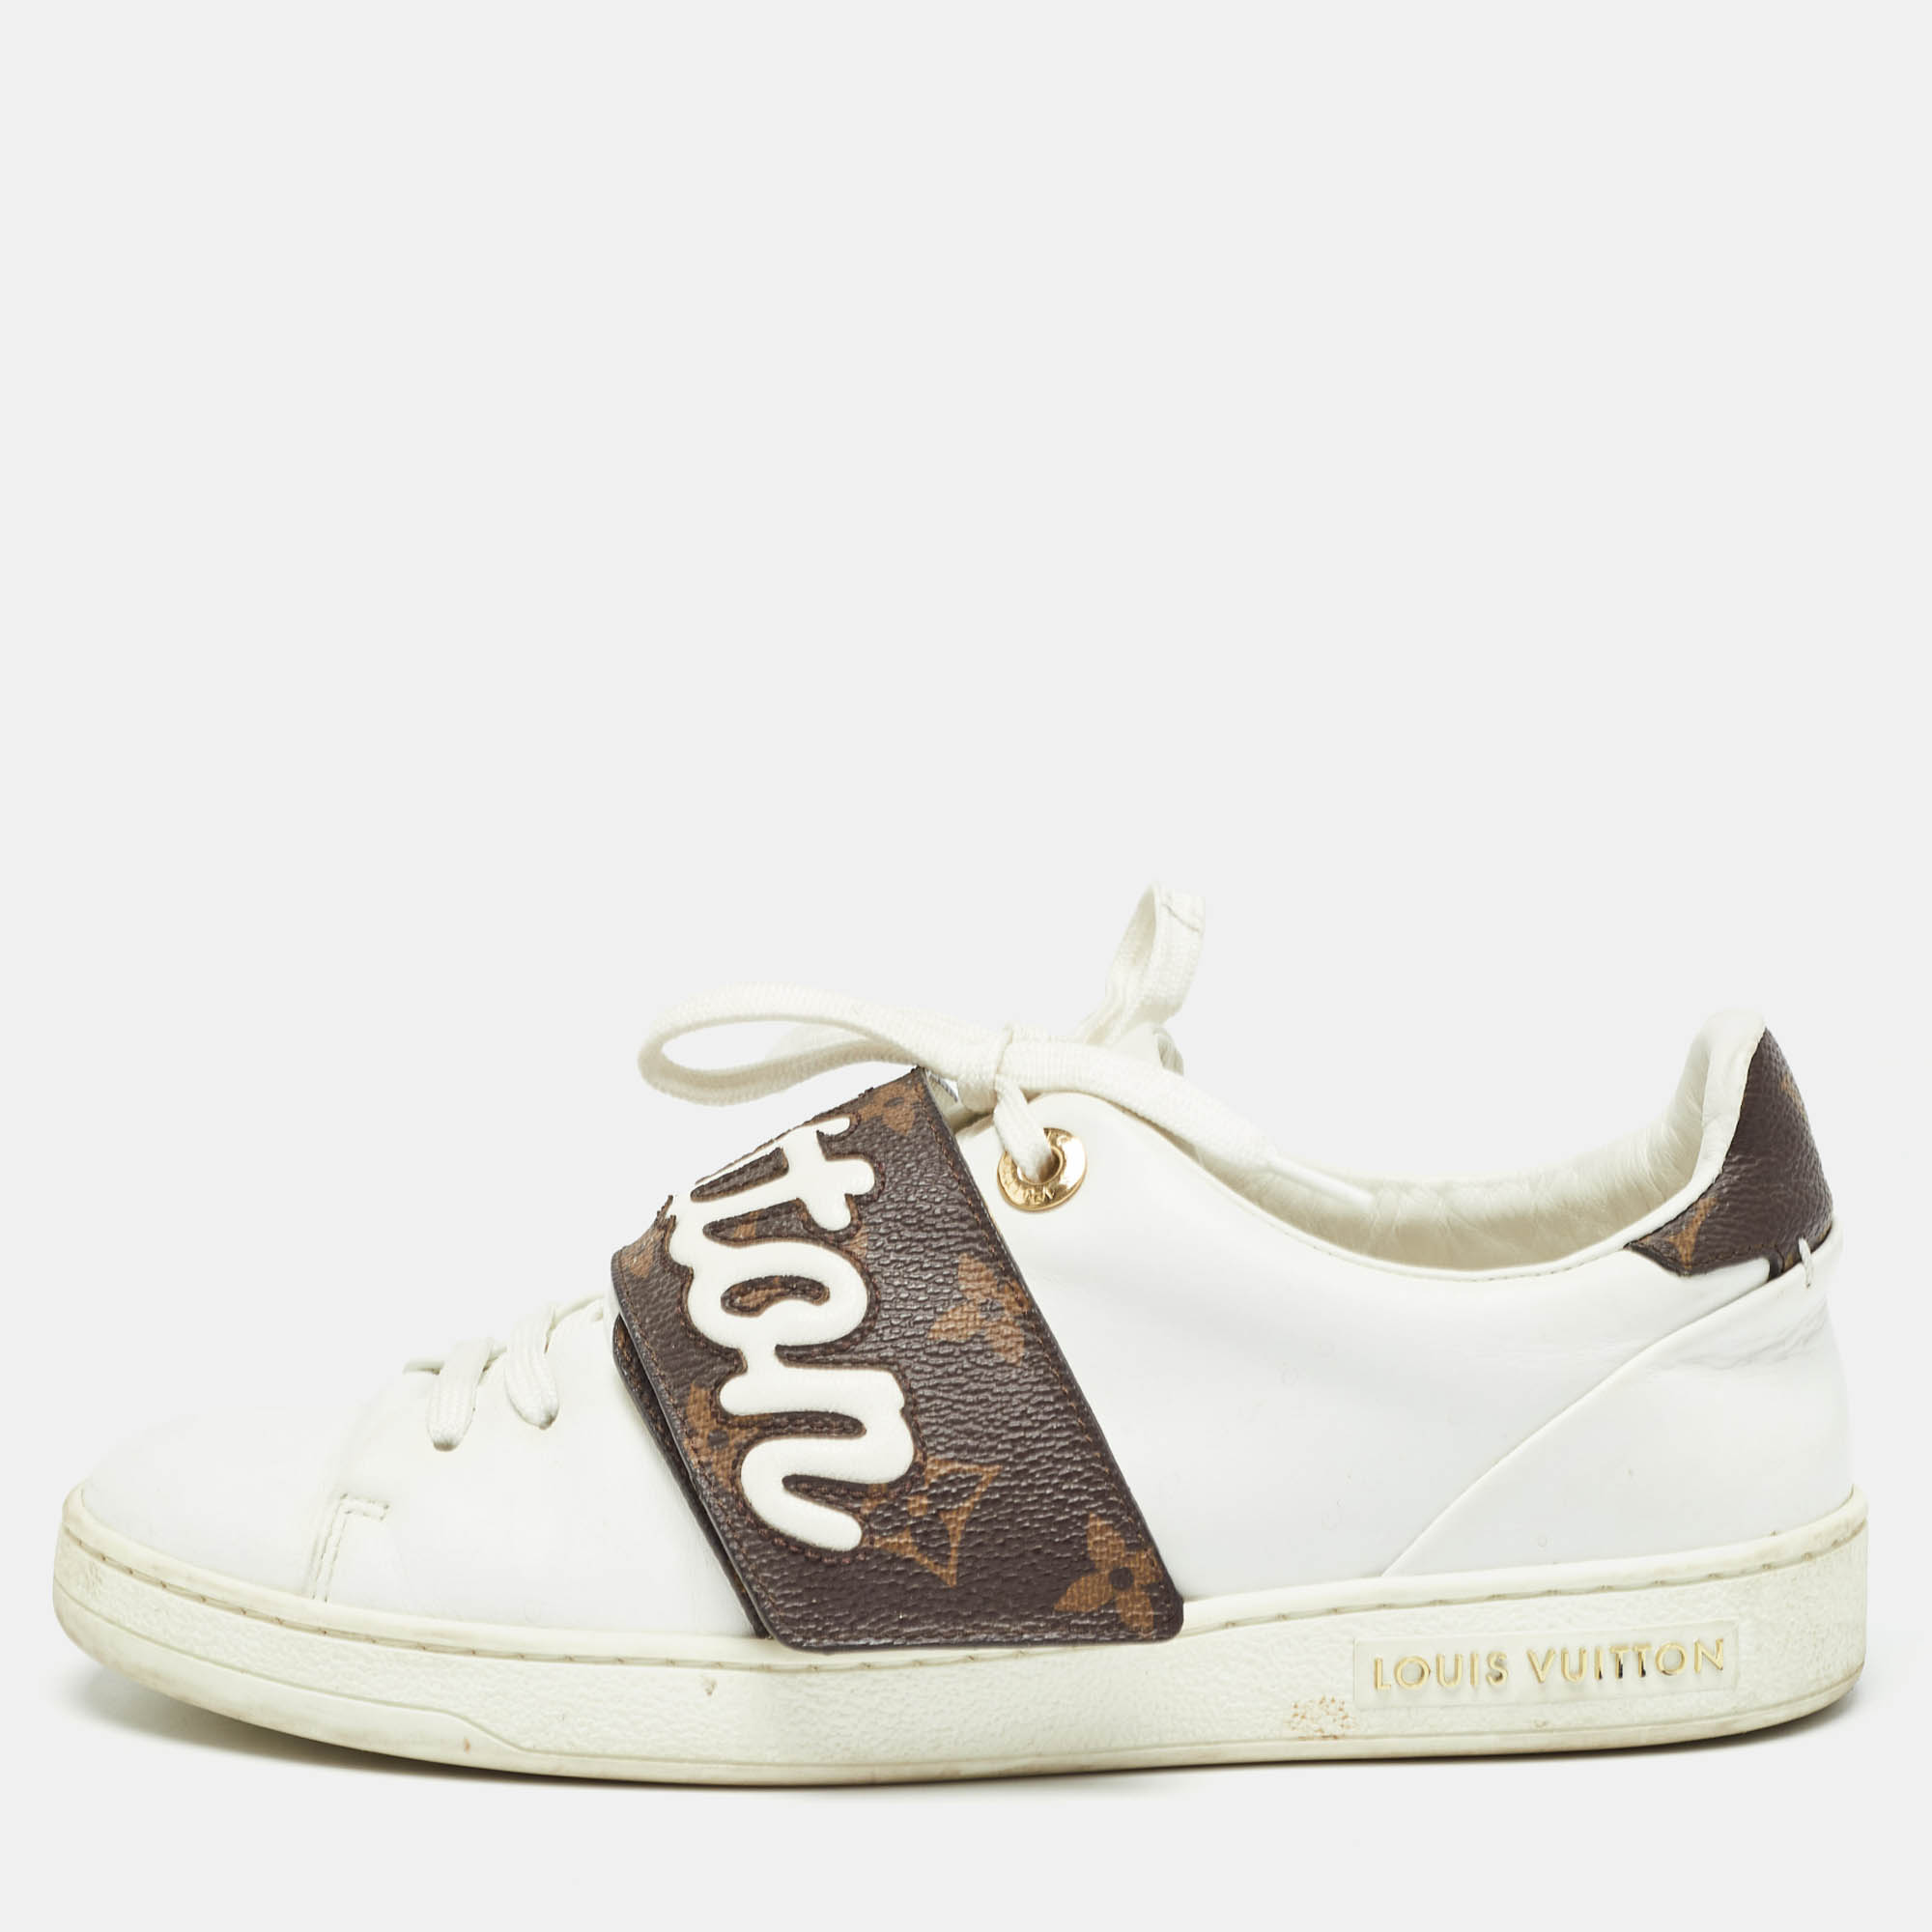 Louis vuitton white leather and monogram coated canvas low top sneakers size 35.5